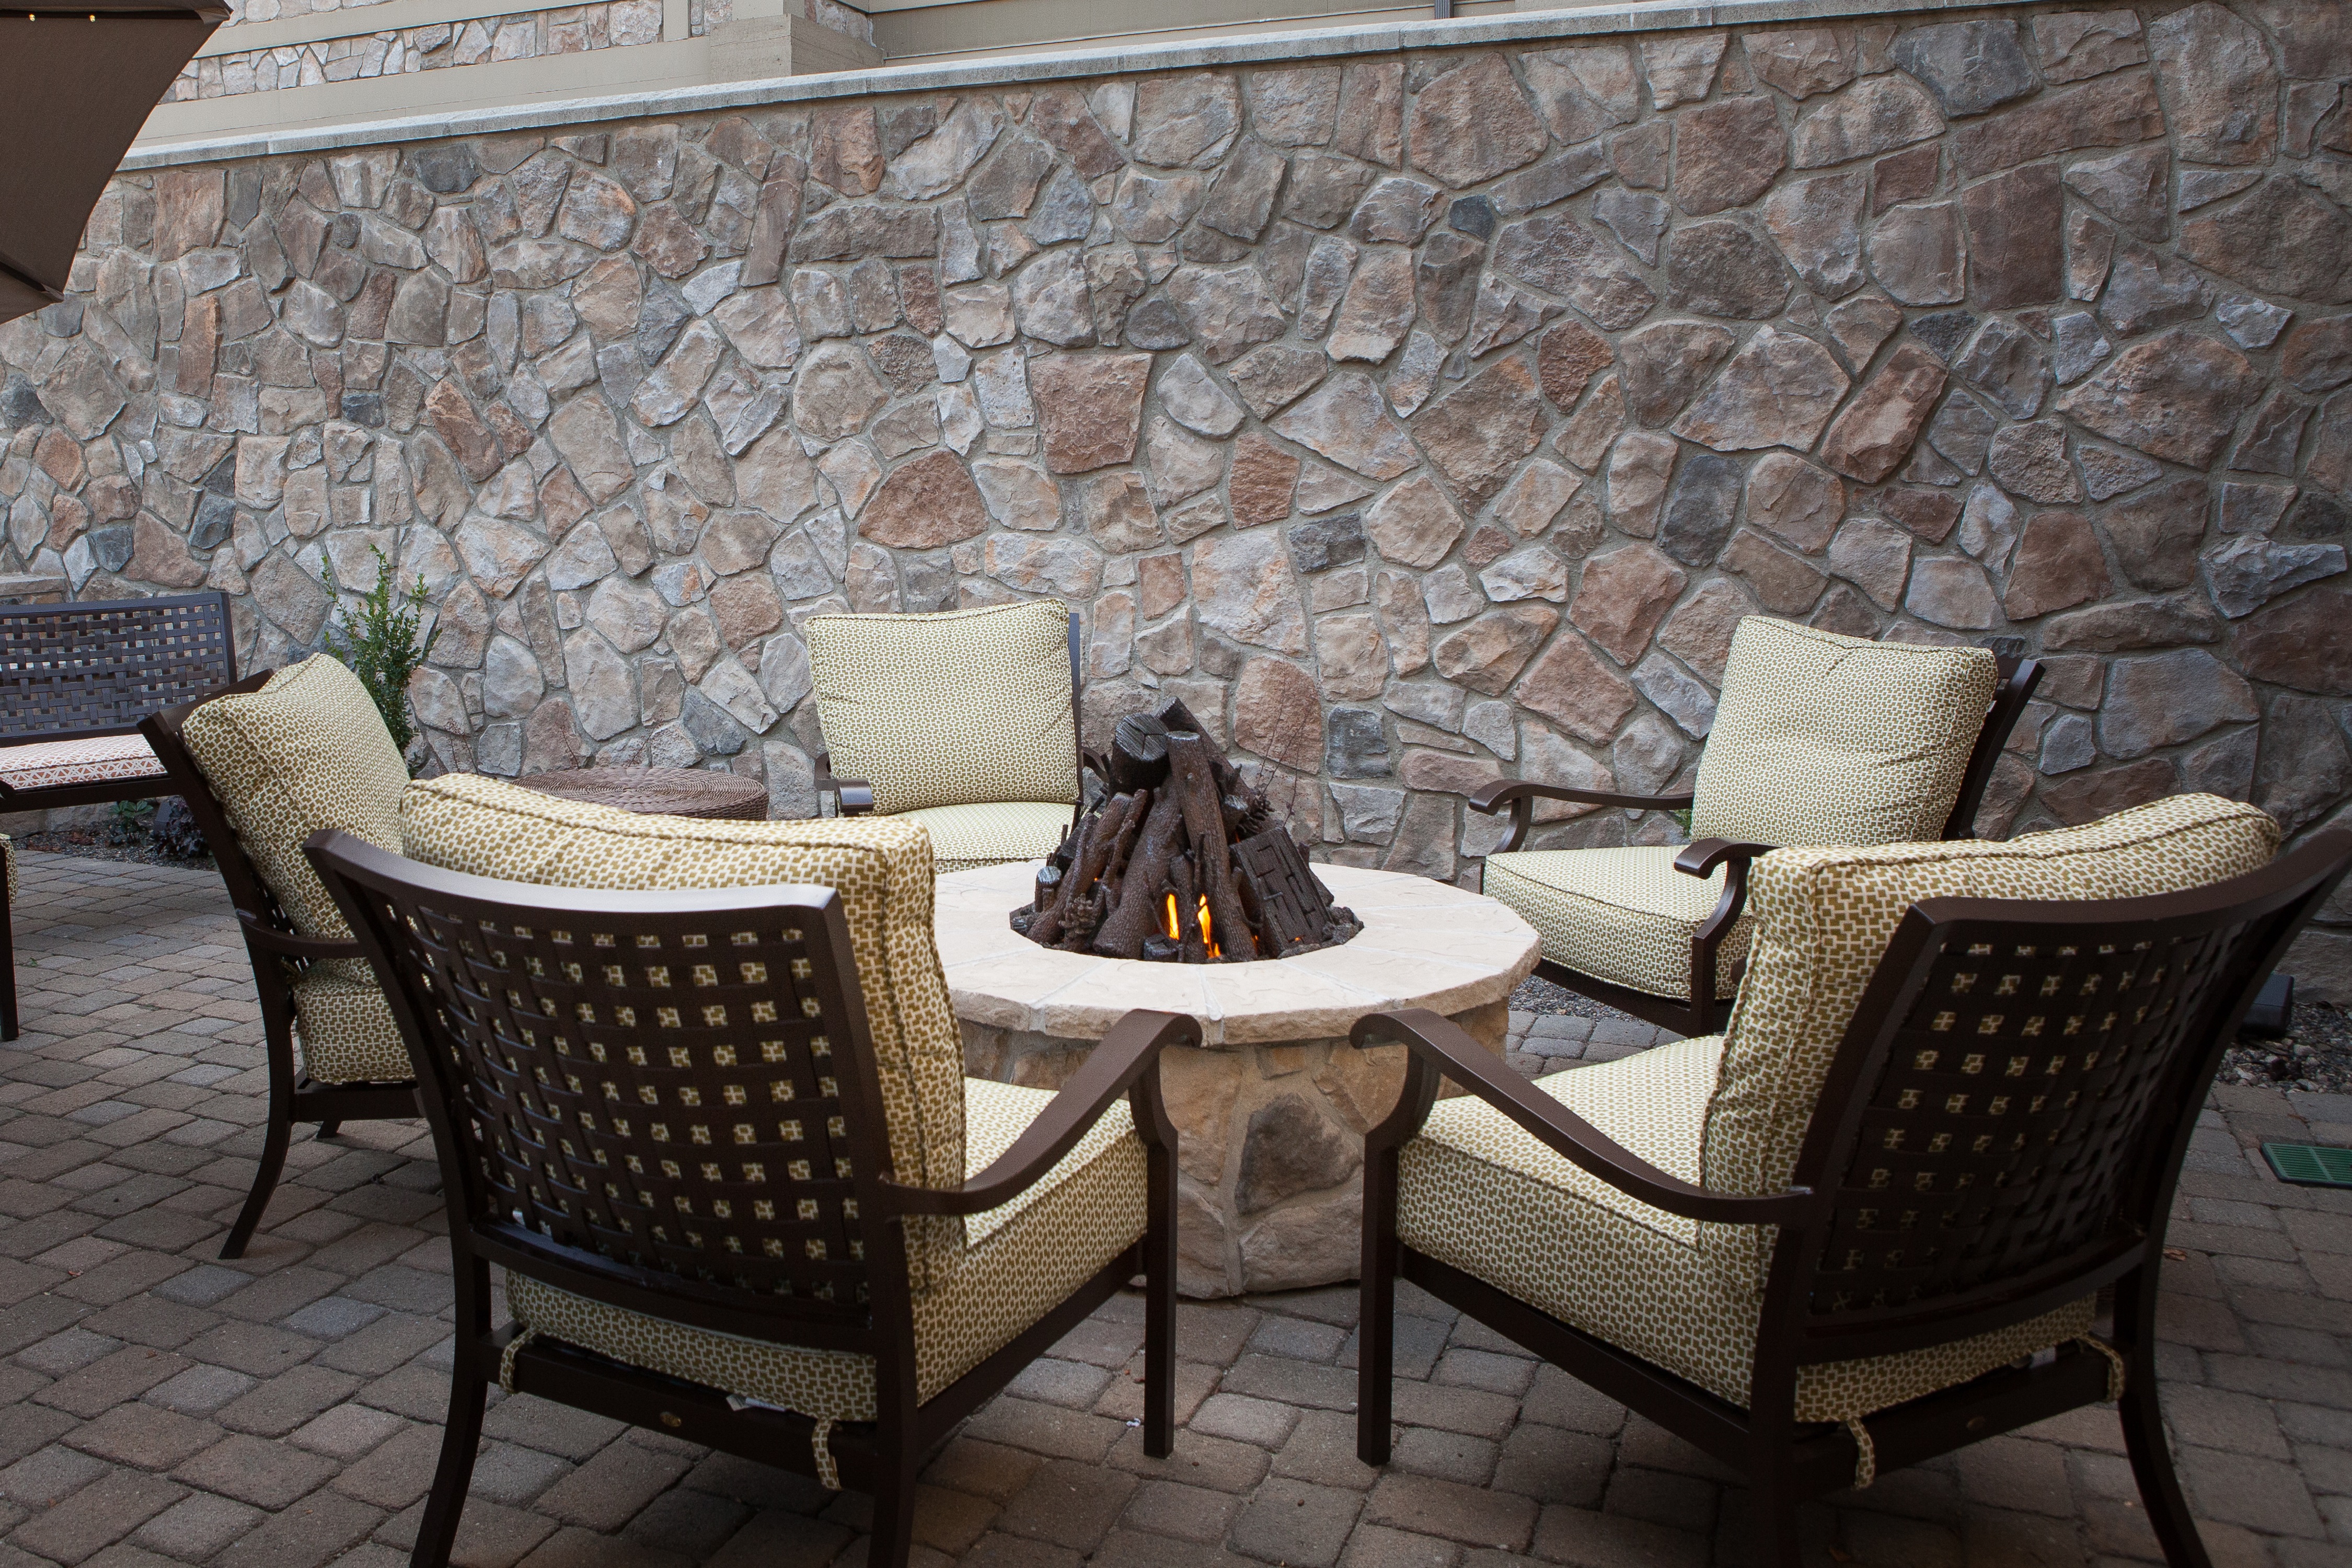 Outdoor Fire Pit and Chairs